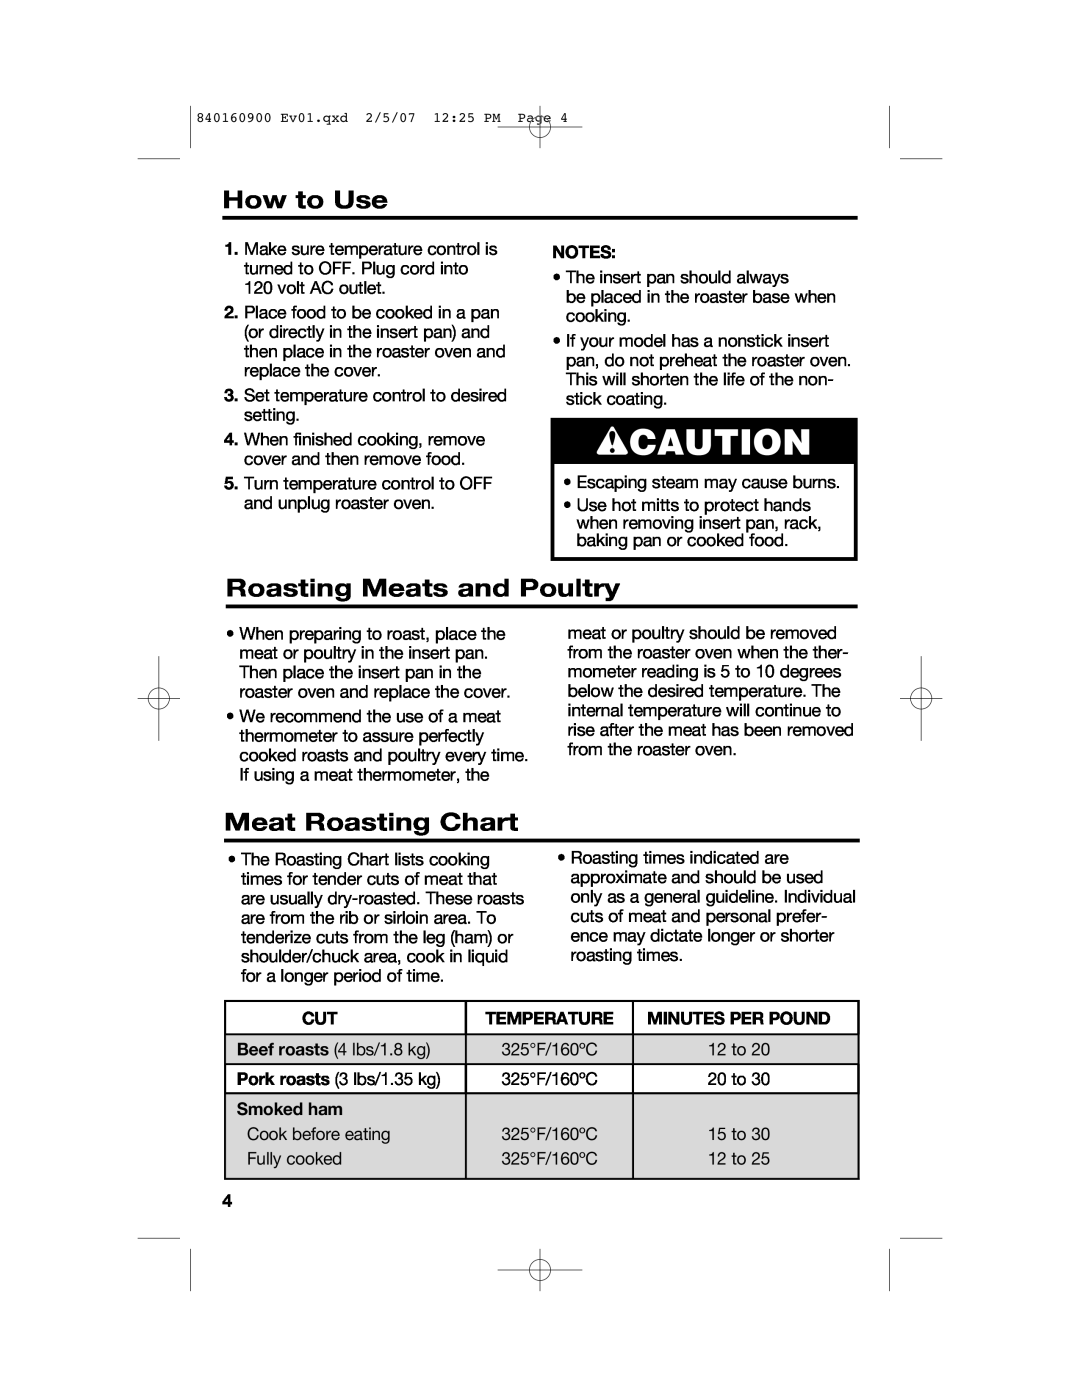 Proctor-Silex Roaster Oven wCAUTION, How to Use, Roasting Meats and Poultry, Meat Roasting Chart, Temperature, Smoked ham 